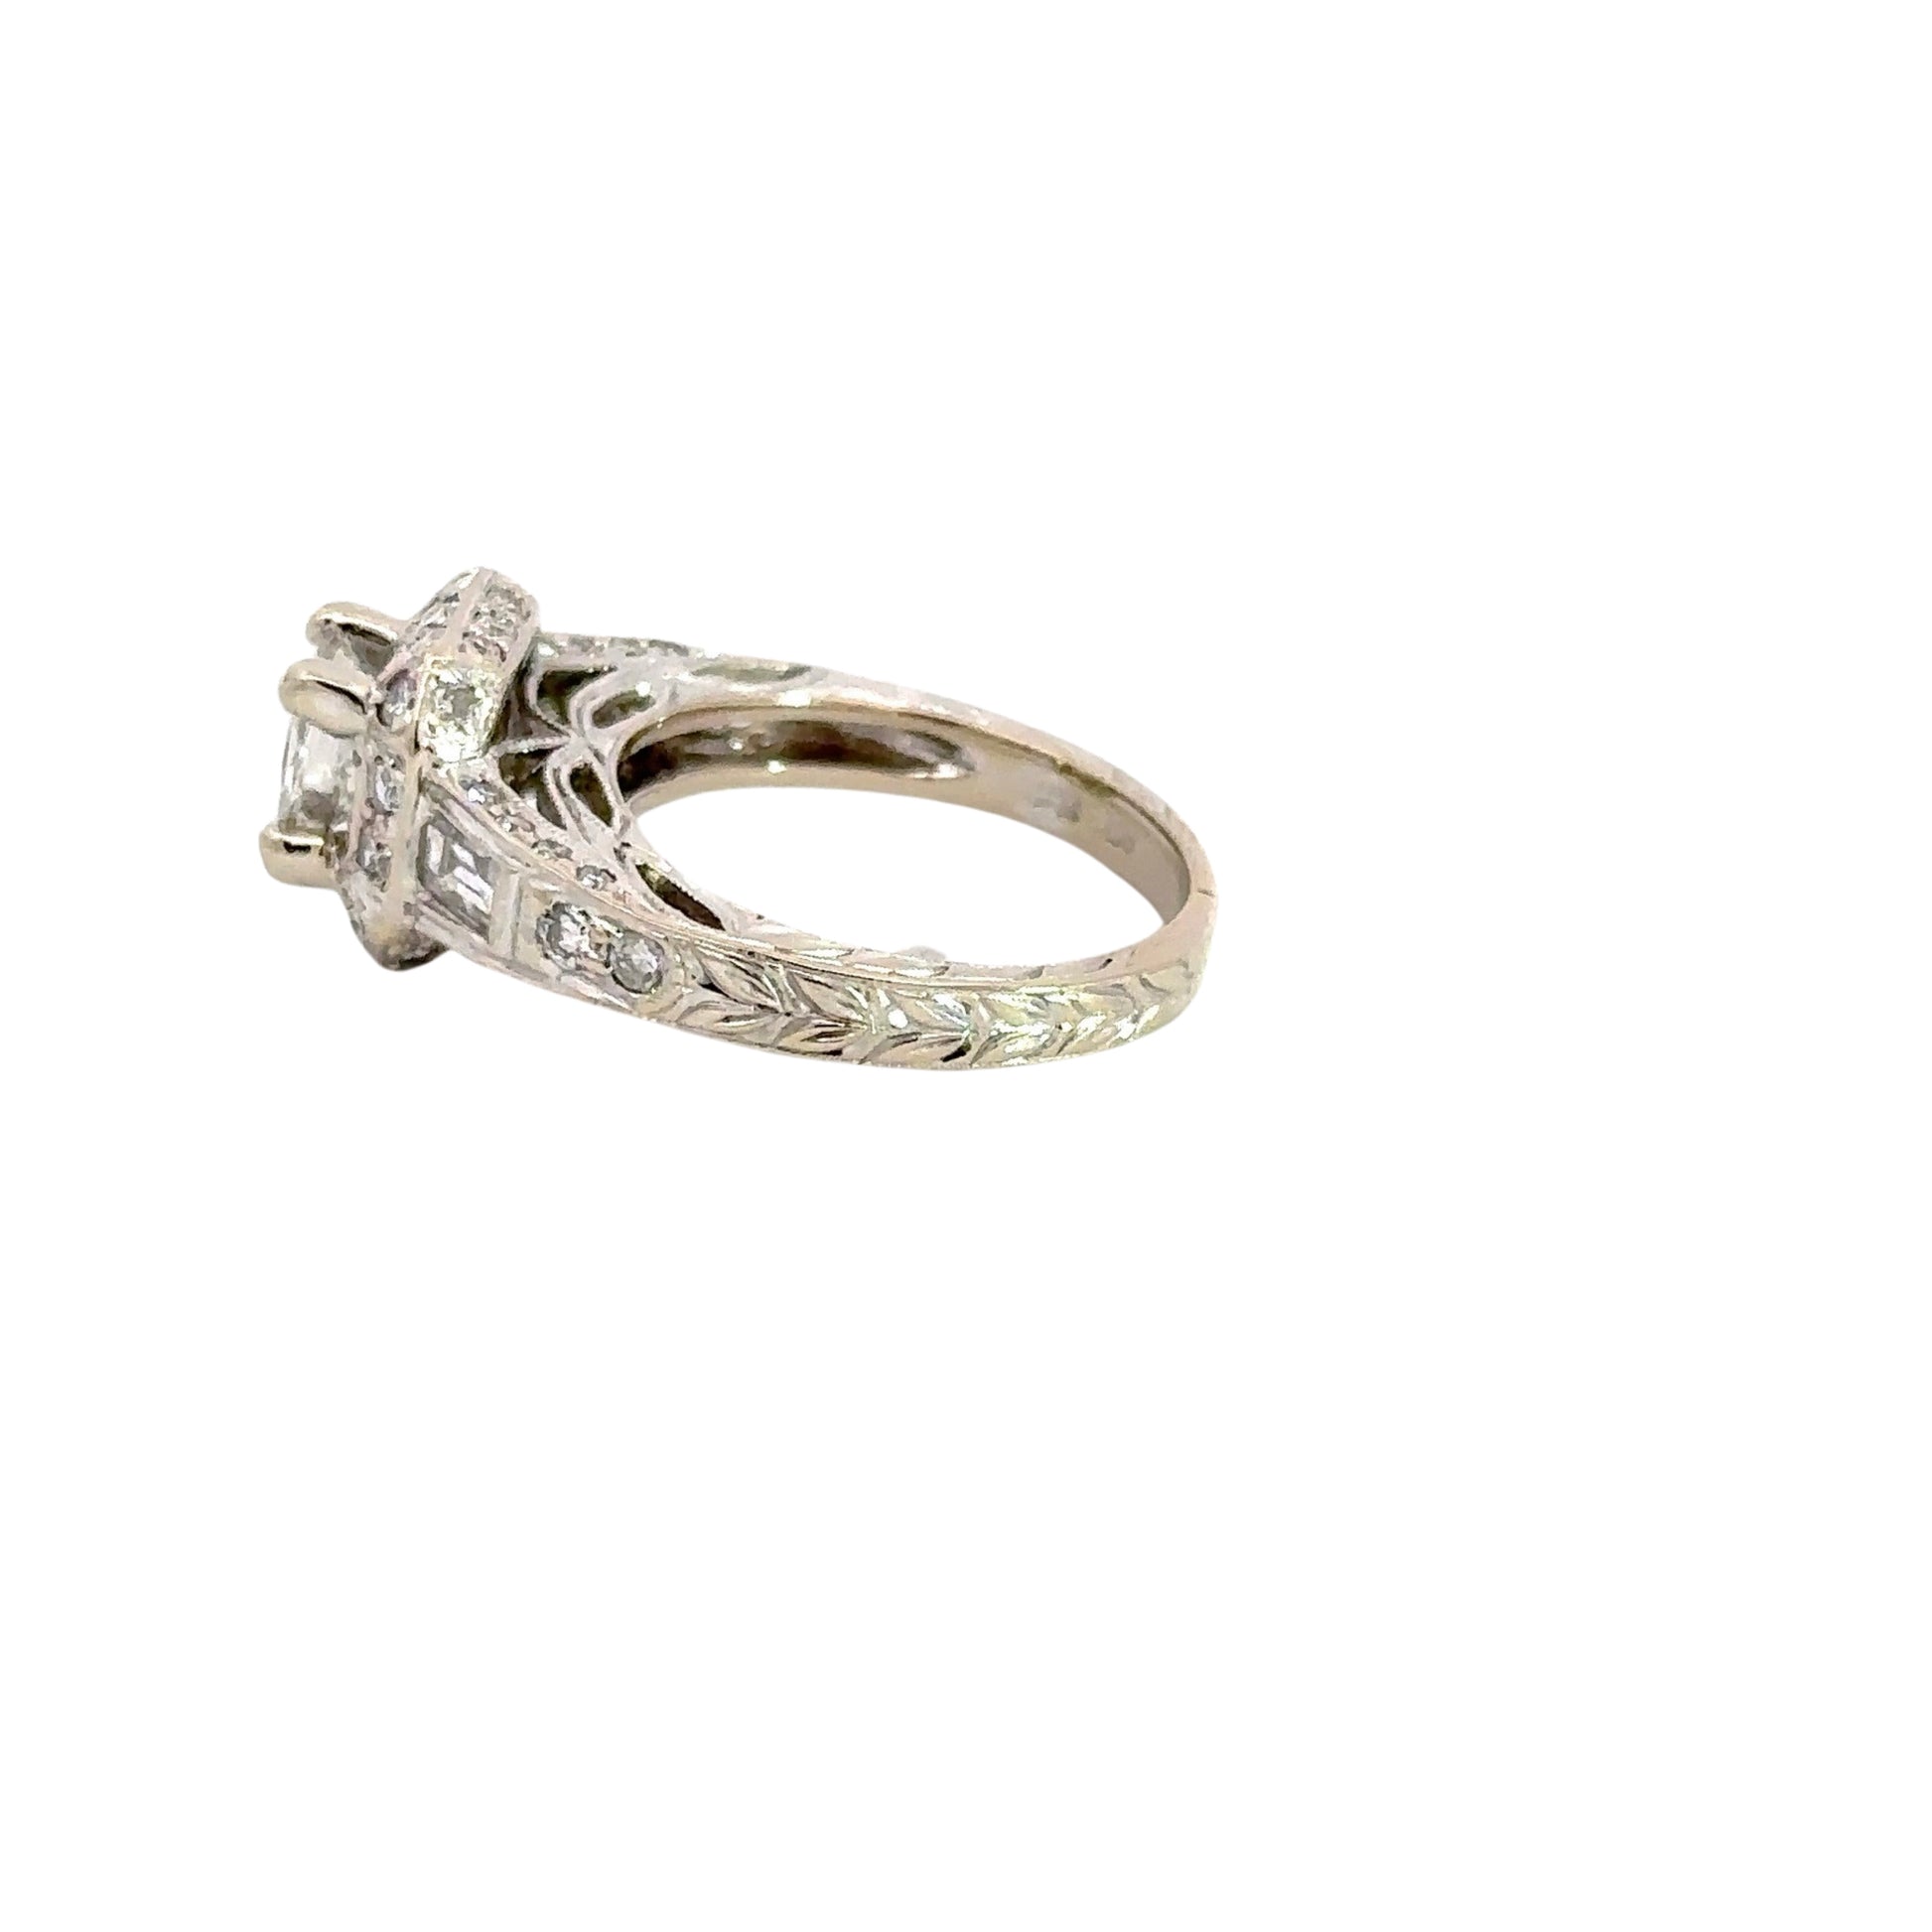 Side of ring with leaf=like engraving details on band. 1 Baguette diamond + 2 small round diamonds on side